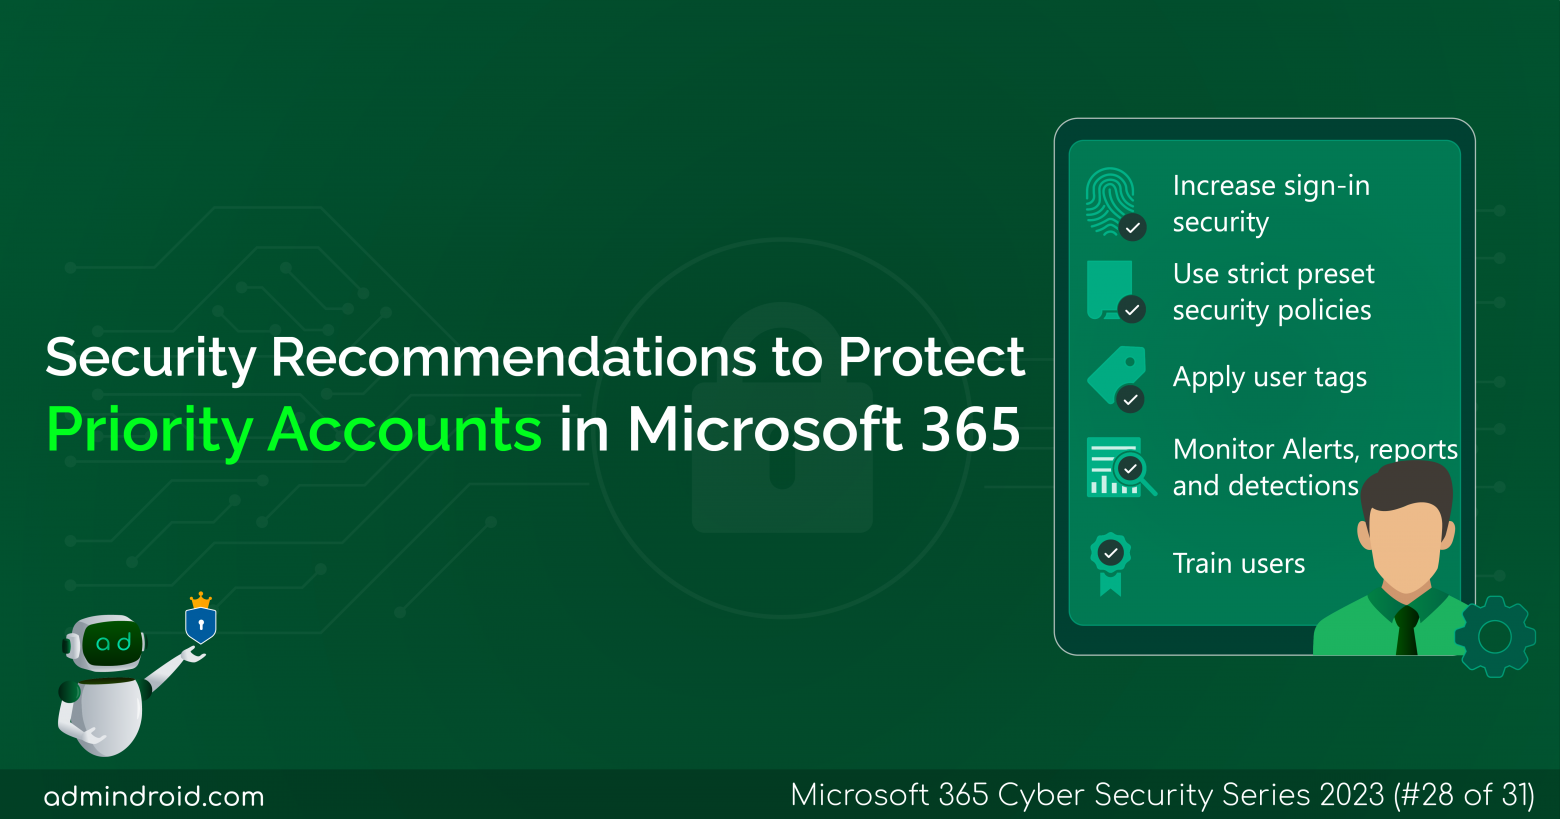 Security Recommendations to protect priority accounts in Microsoft 365